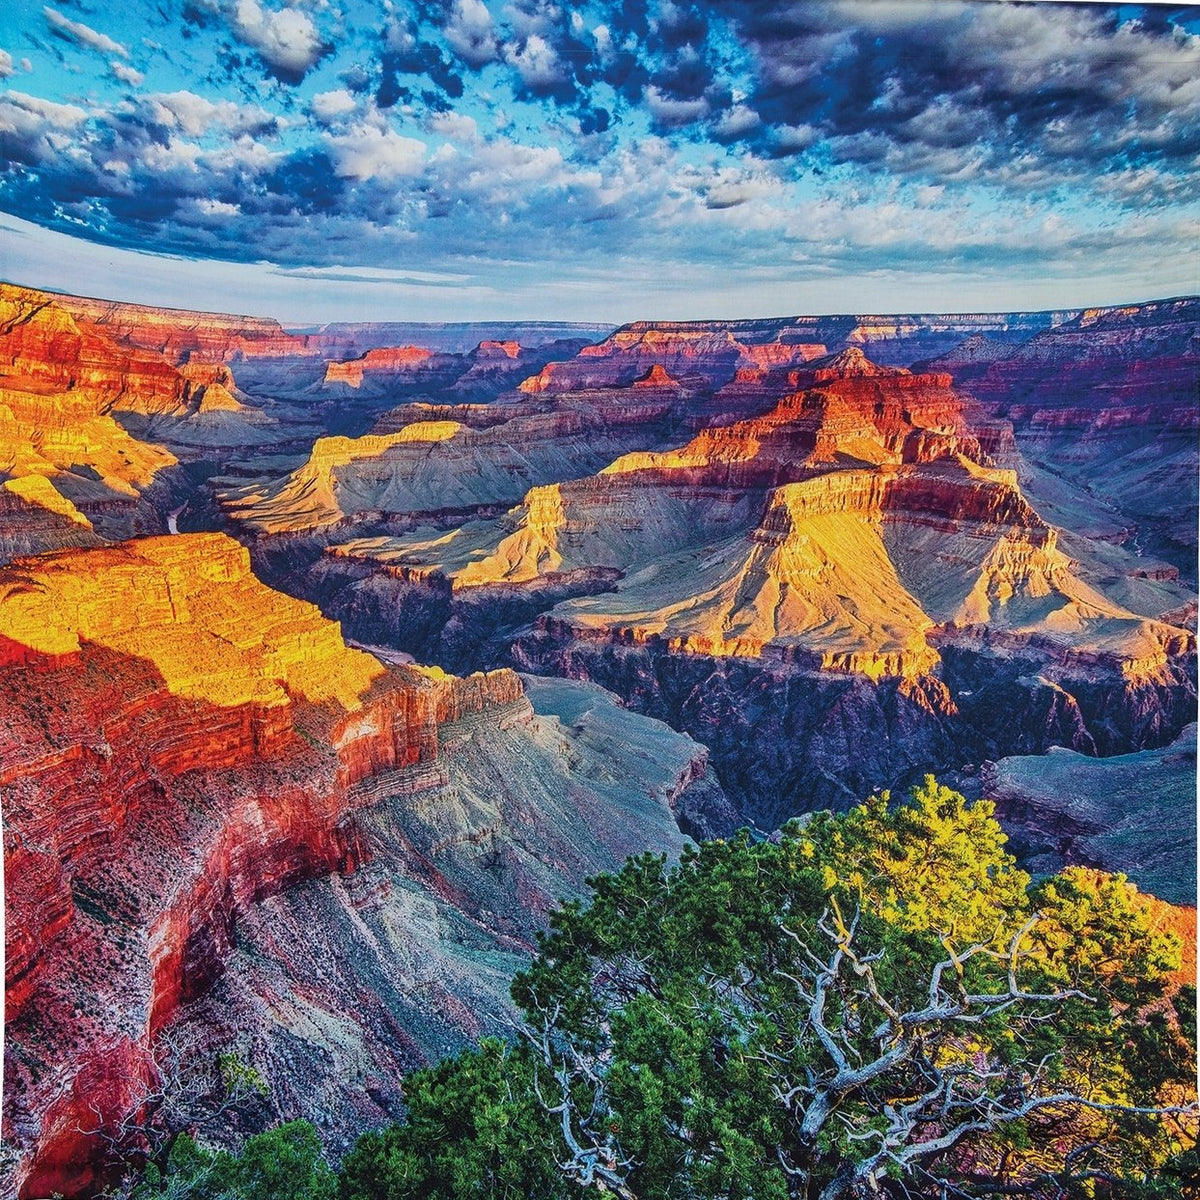 Grand Canyon Sunset Photo Tapestry and Hanging Wall Art (Extra Large, 4.8 x 4.8 Feet, 100% Cotton) - PaperLanternStore.com - Paper Lanterns, Decor, Party Lights &amp; More